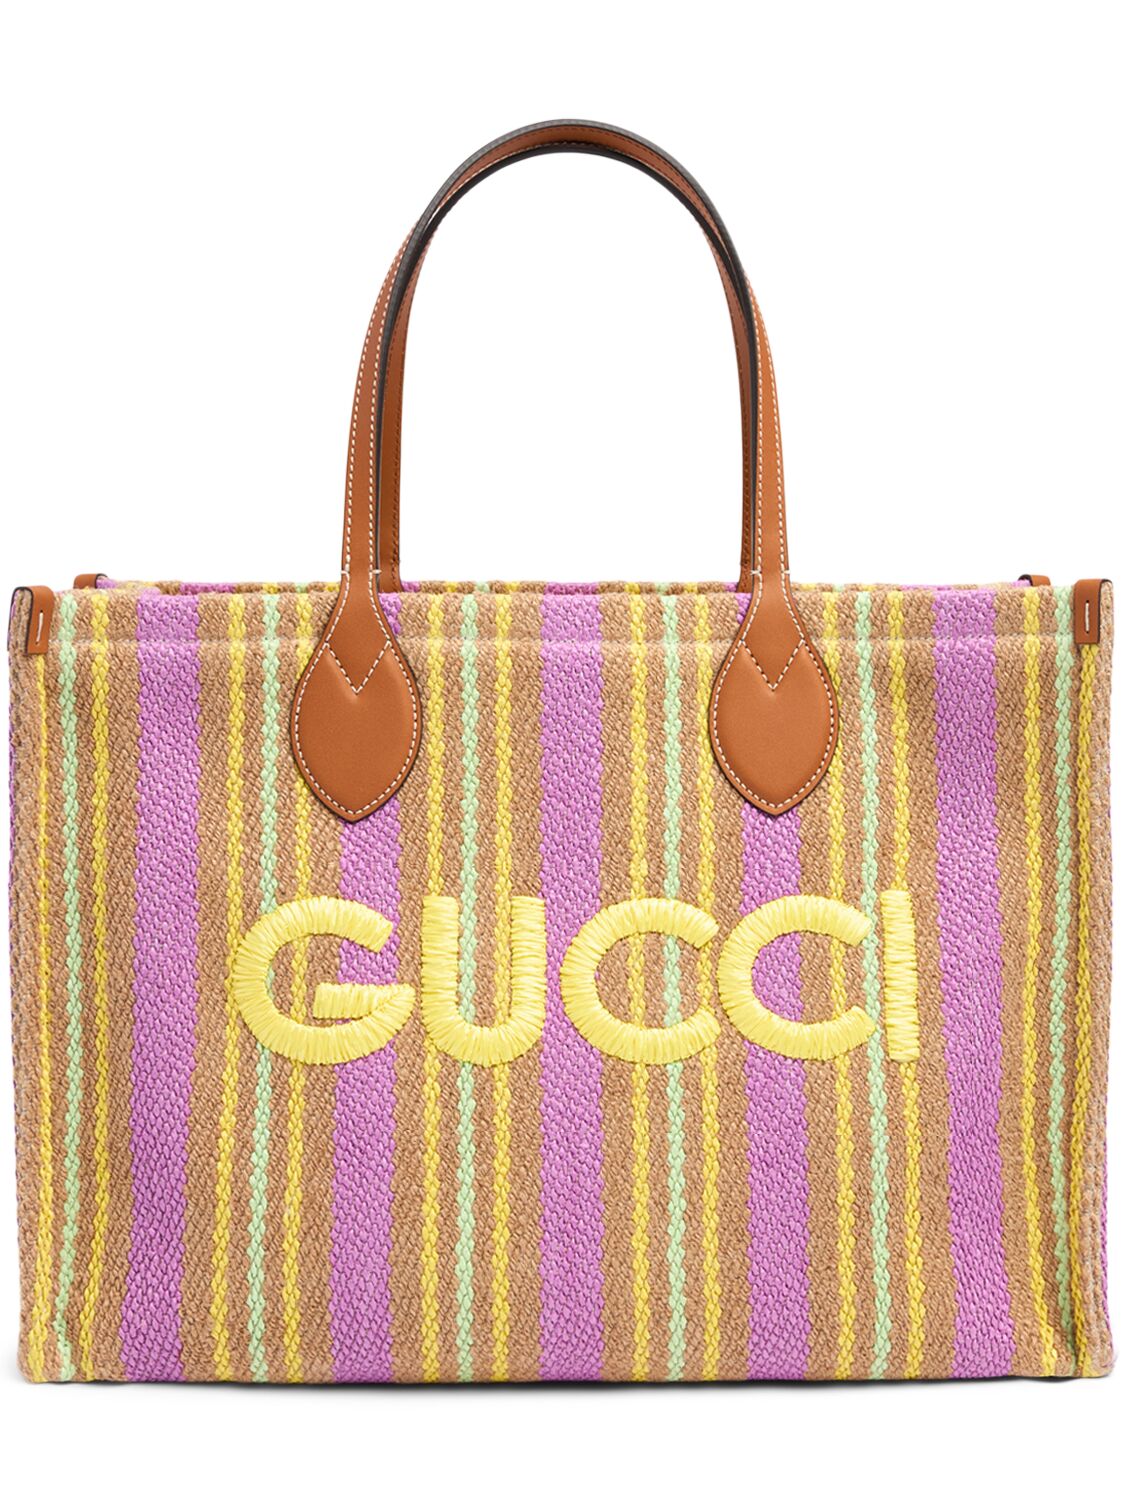 Gucci Summer Canvas Tote Bag In Yellow,multi